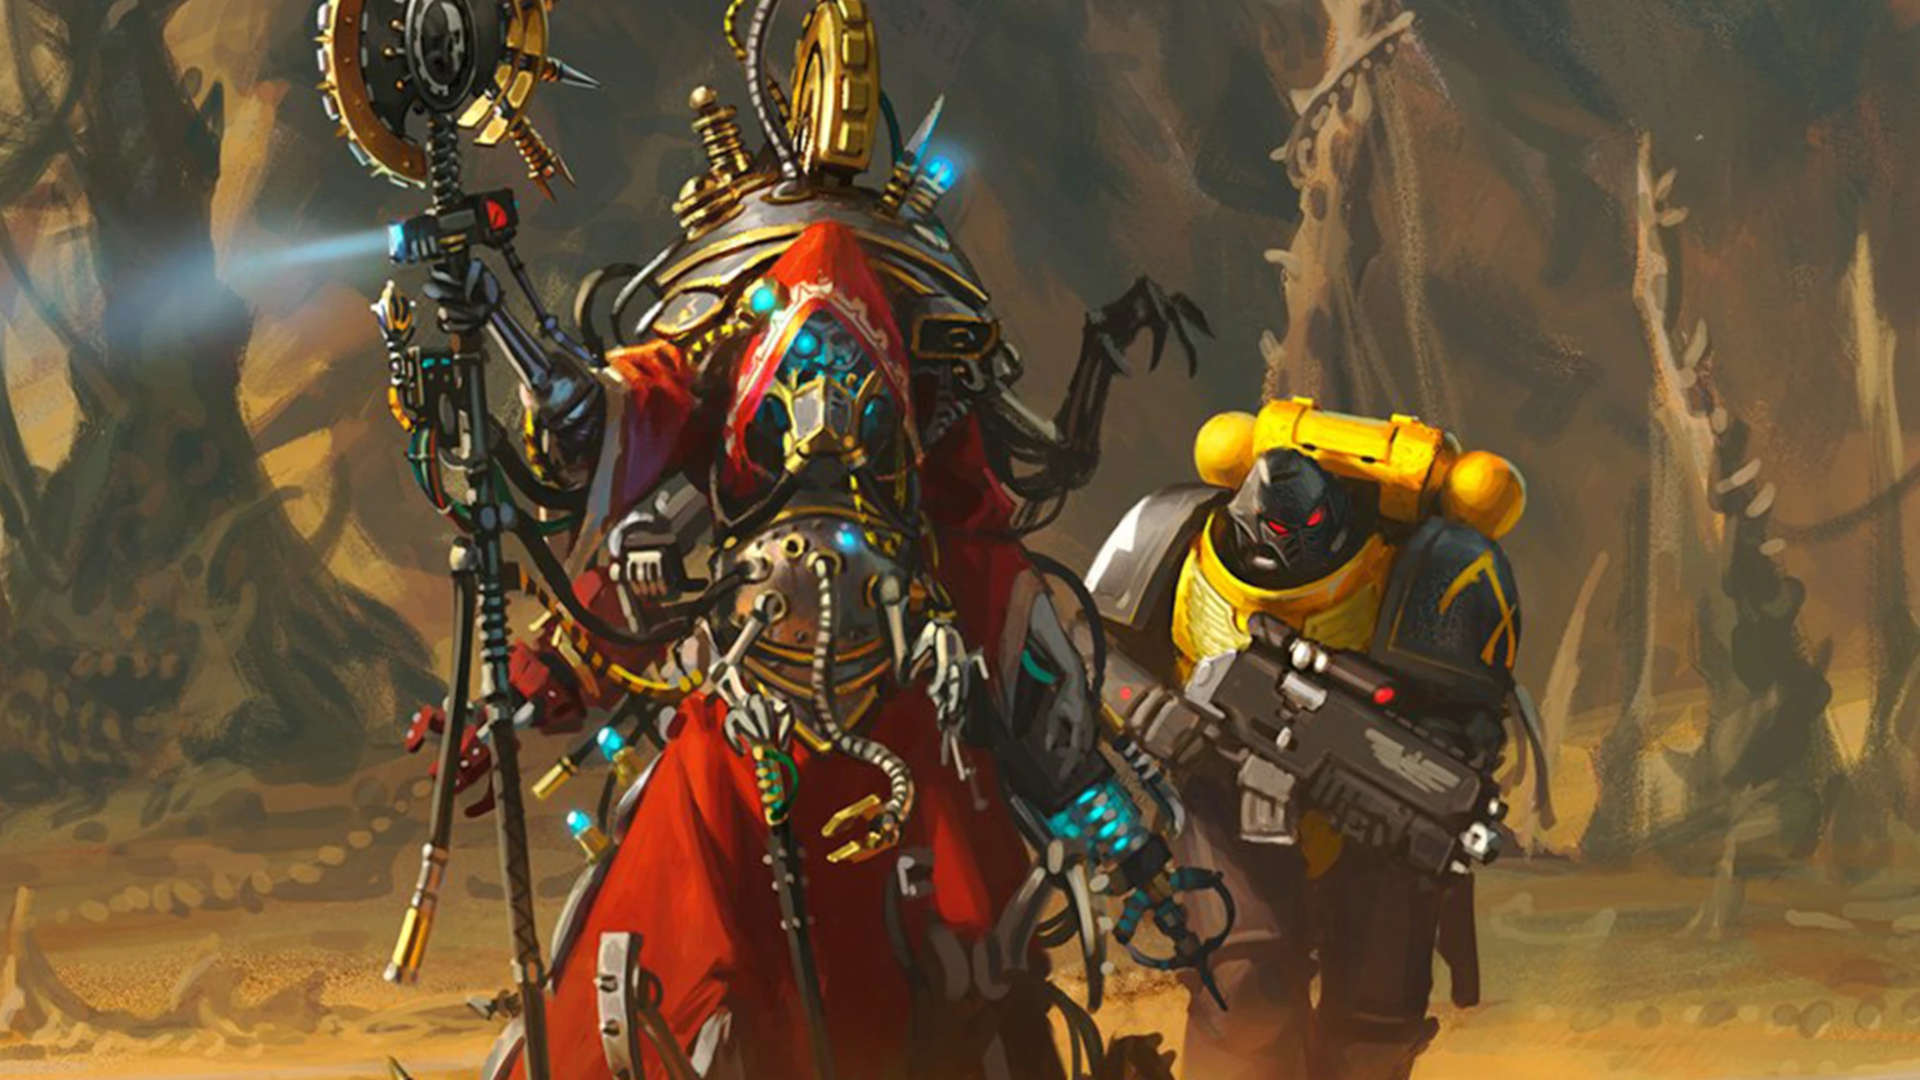 Mad scientists face off in new Warhammer 40k novel